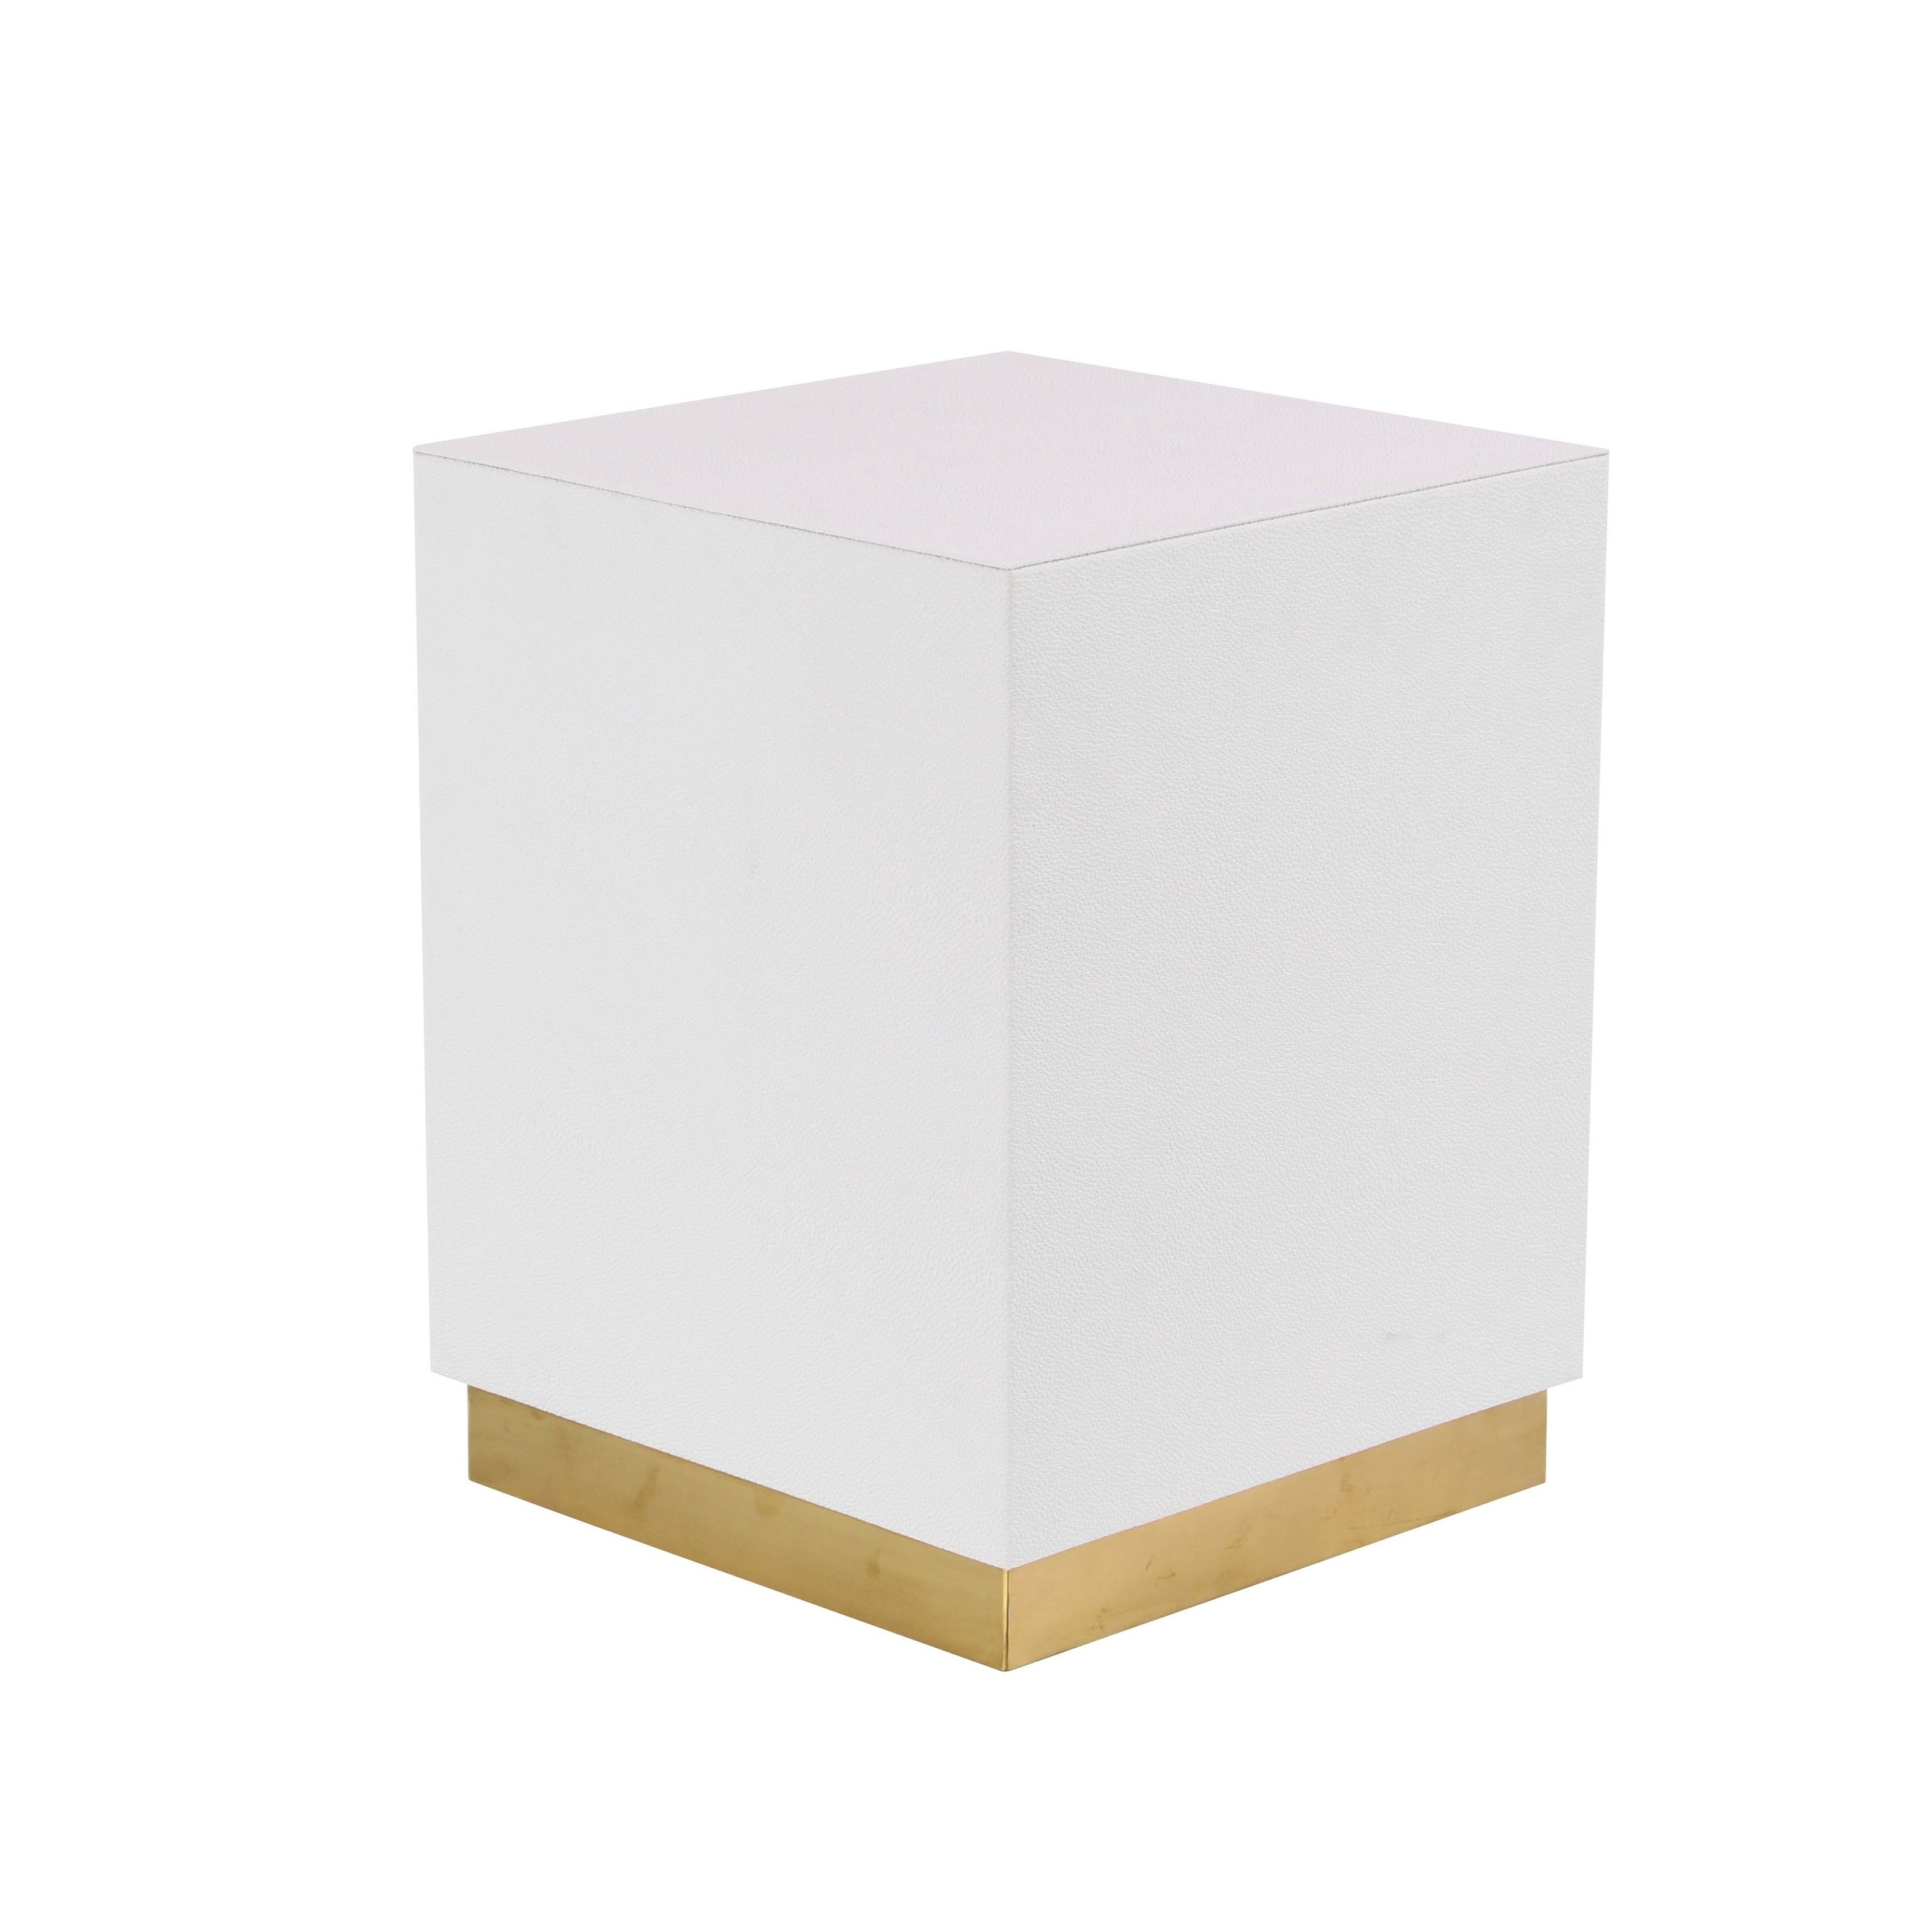 modern inch square white accent table studio round cardboard free shipping today tall nightstand lamps mirrored console ikea plastic outdoor side clearance bedding pottery barn